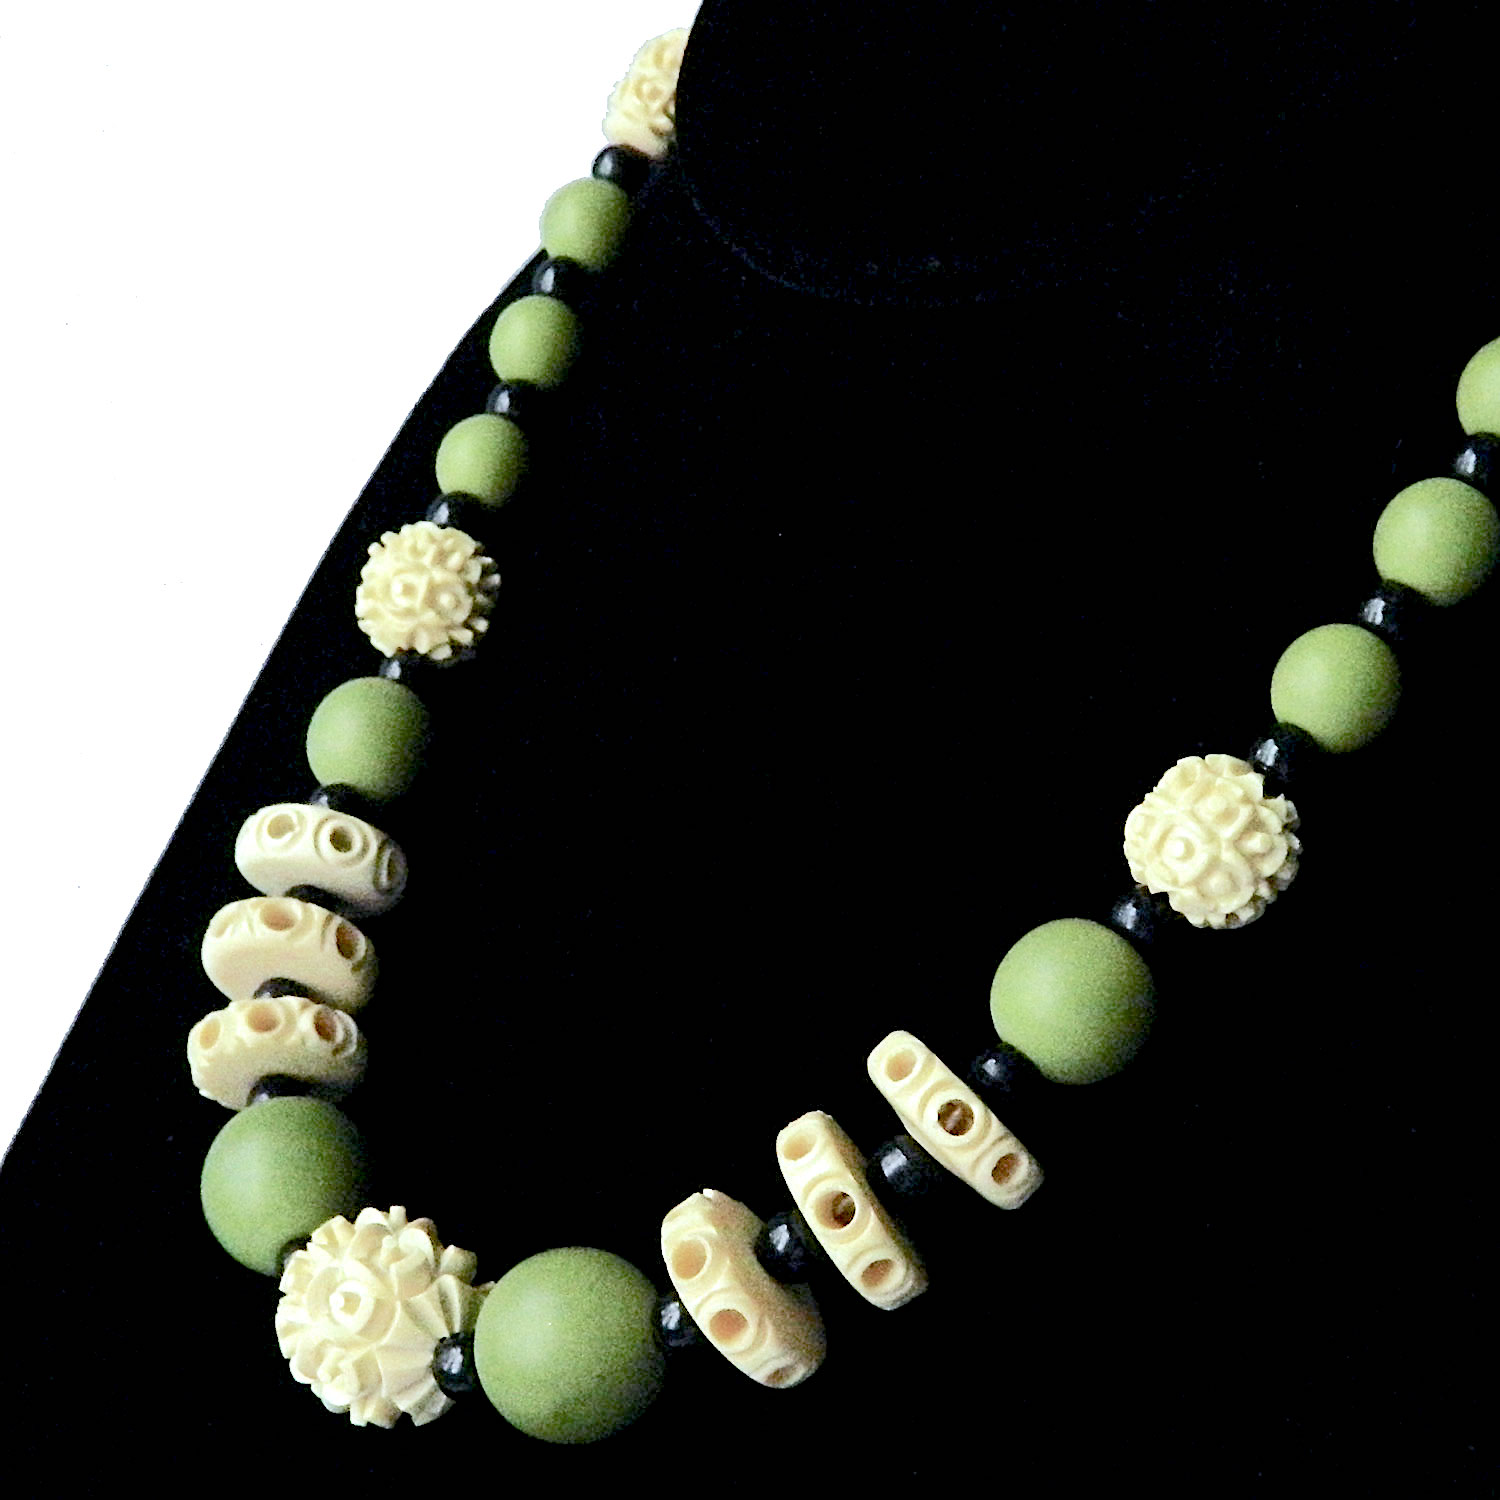 celluloid bead necklace